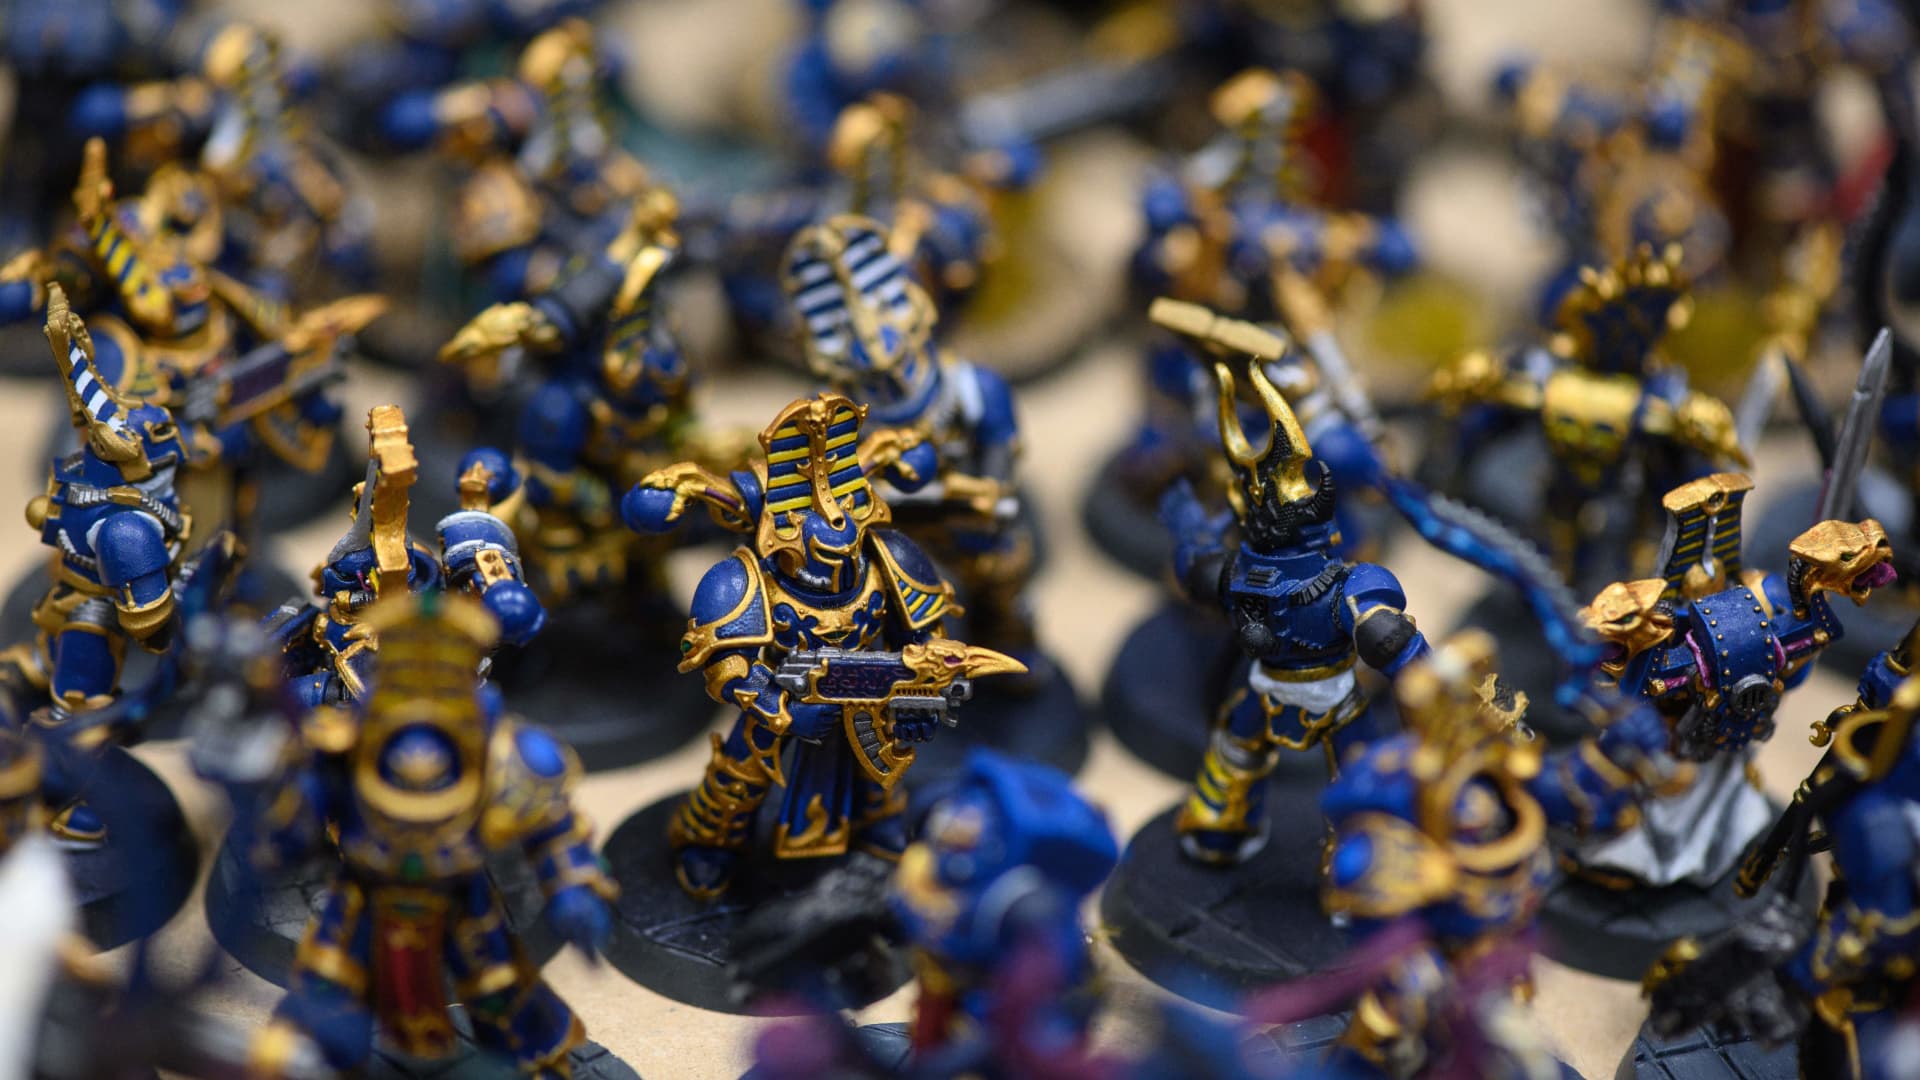 Amazon signs deal to bring fantasy game Warhammer to screens